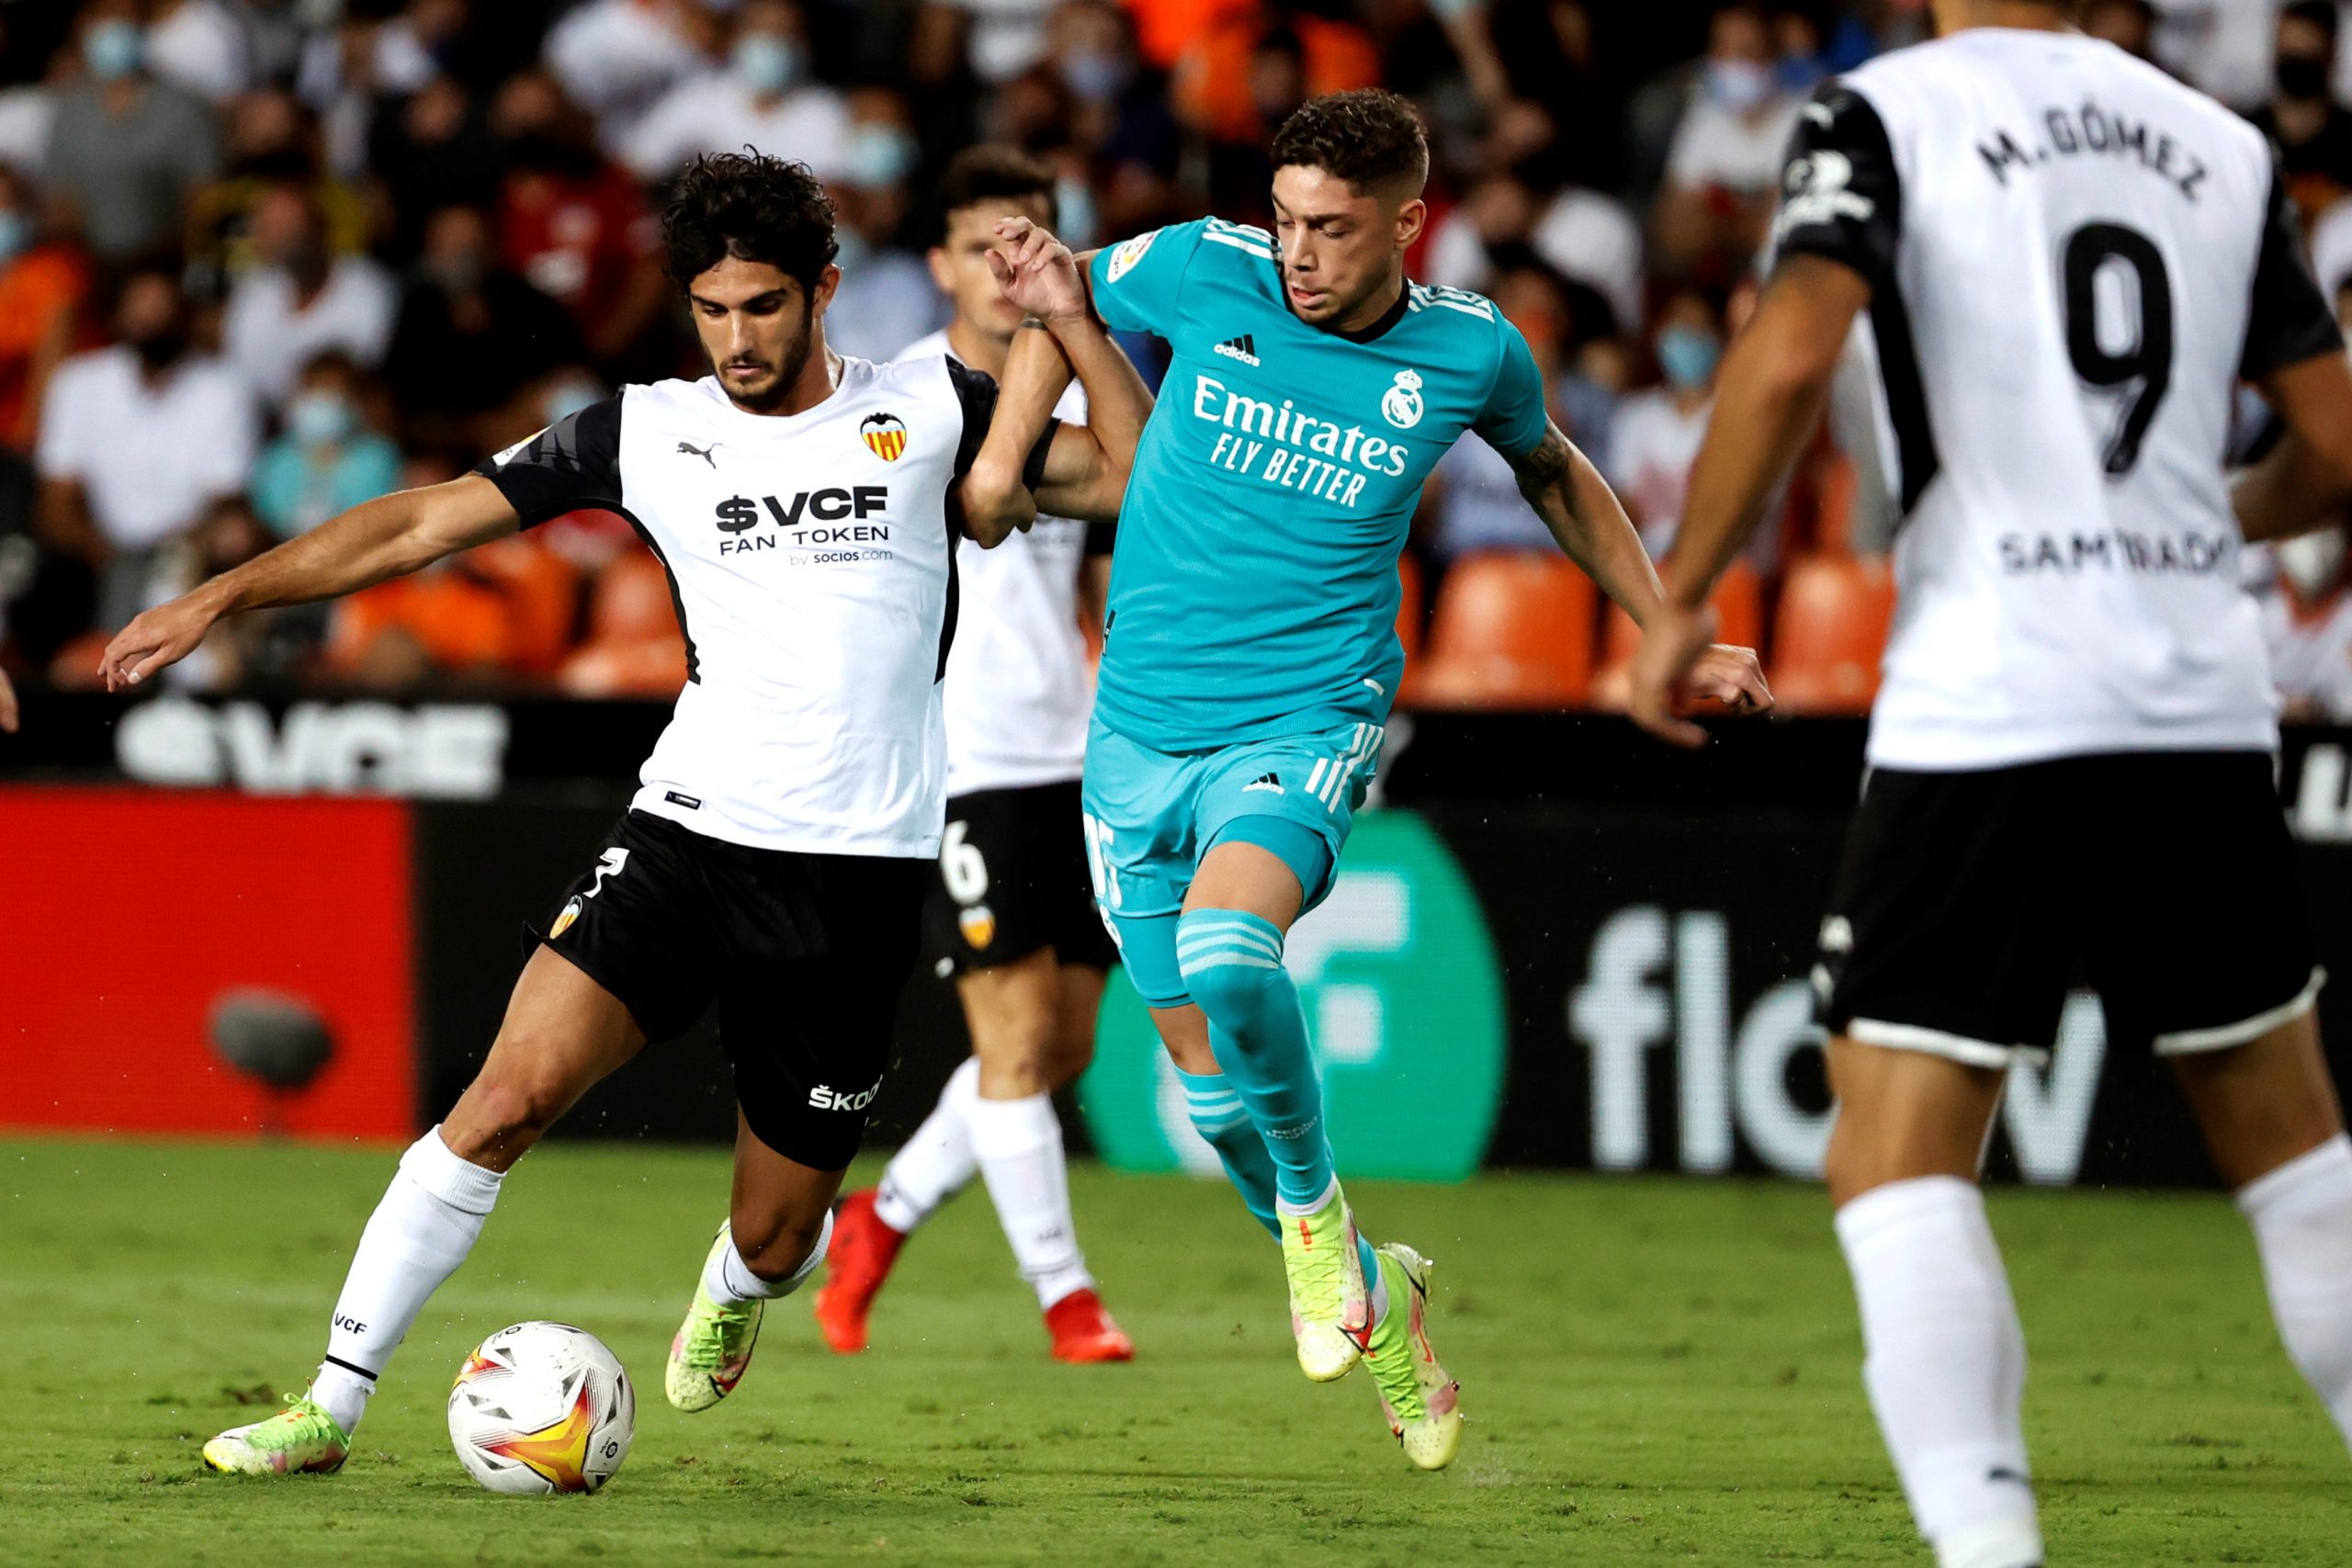 epa09477136 Valencia's striker Gonçalo Guedes (L) vies for the ball with Real Madrid's midfielder Federico Valverde (C) during the Spanish LaLiga soccer match between Valencia CF and Real Madrid held at Mestalla stadium in Valencia, eastern Spain, 19 September 2021.  EPA/Kai Forsterling